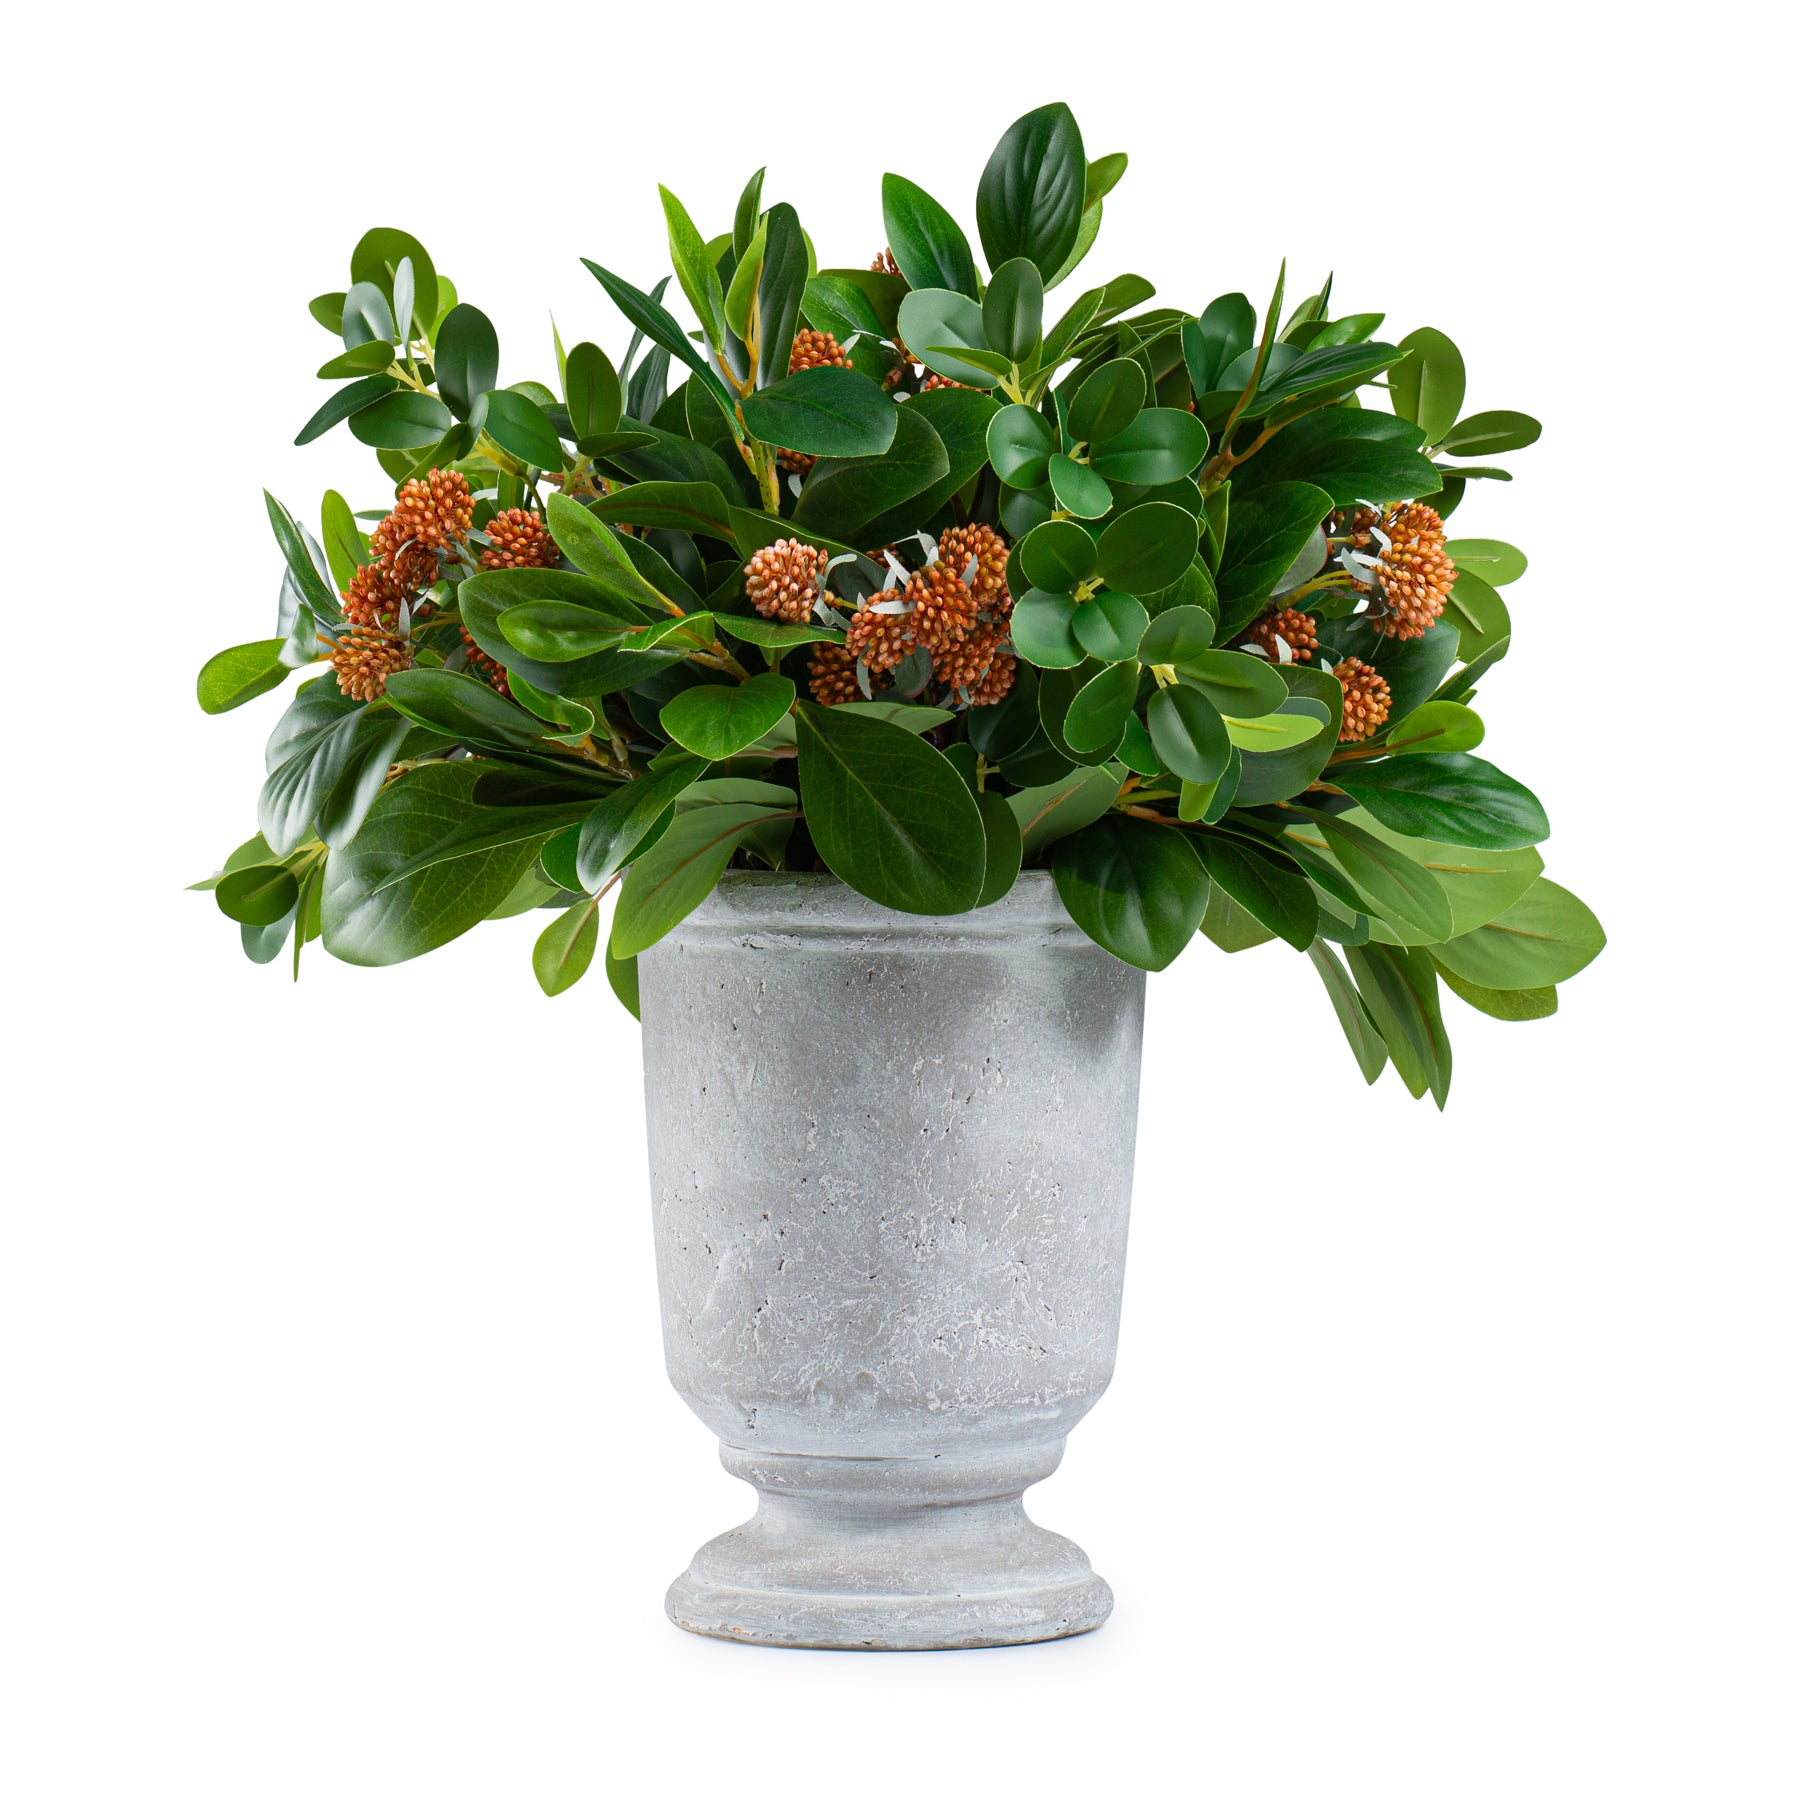 Orange Berries with Green Leaves  in Stone Pot